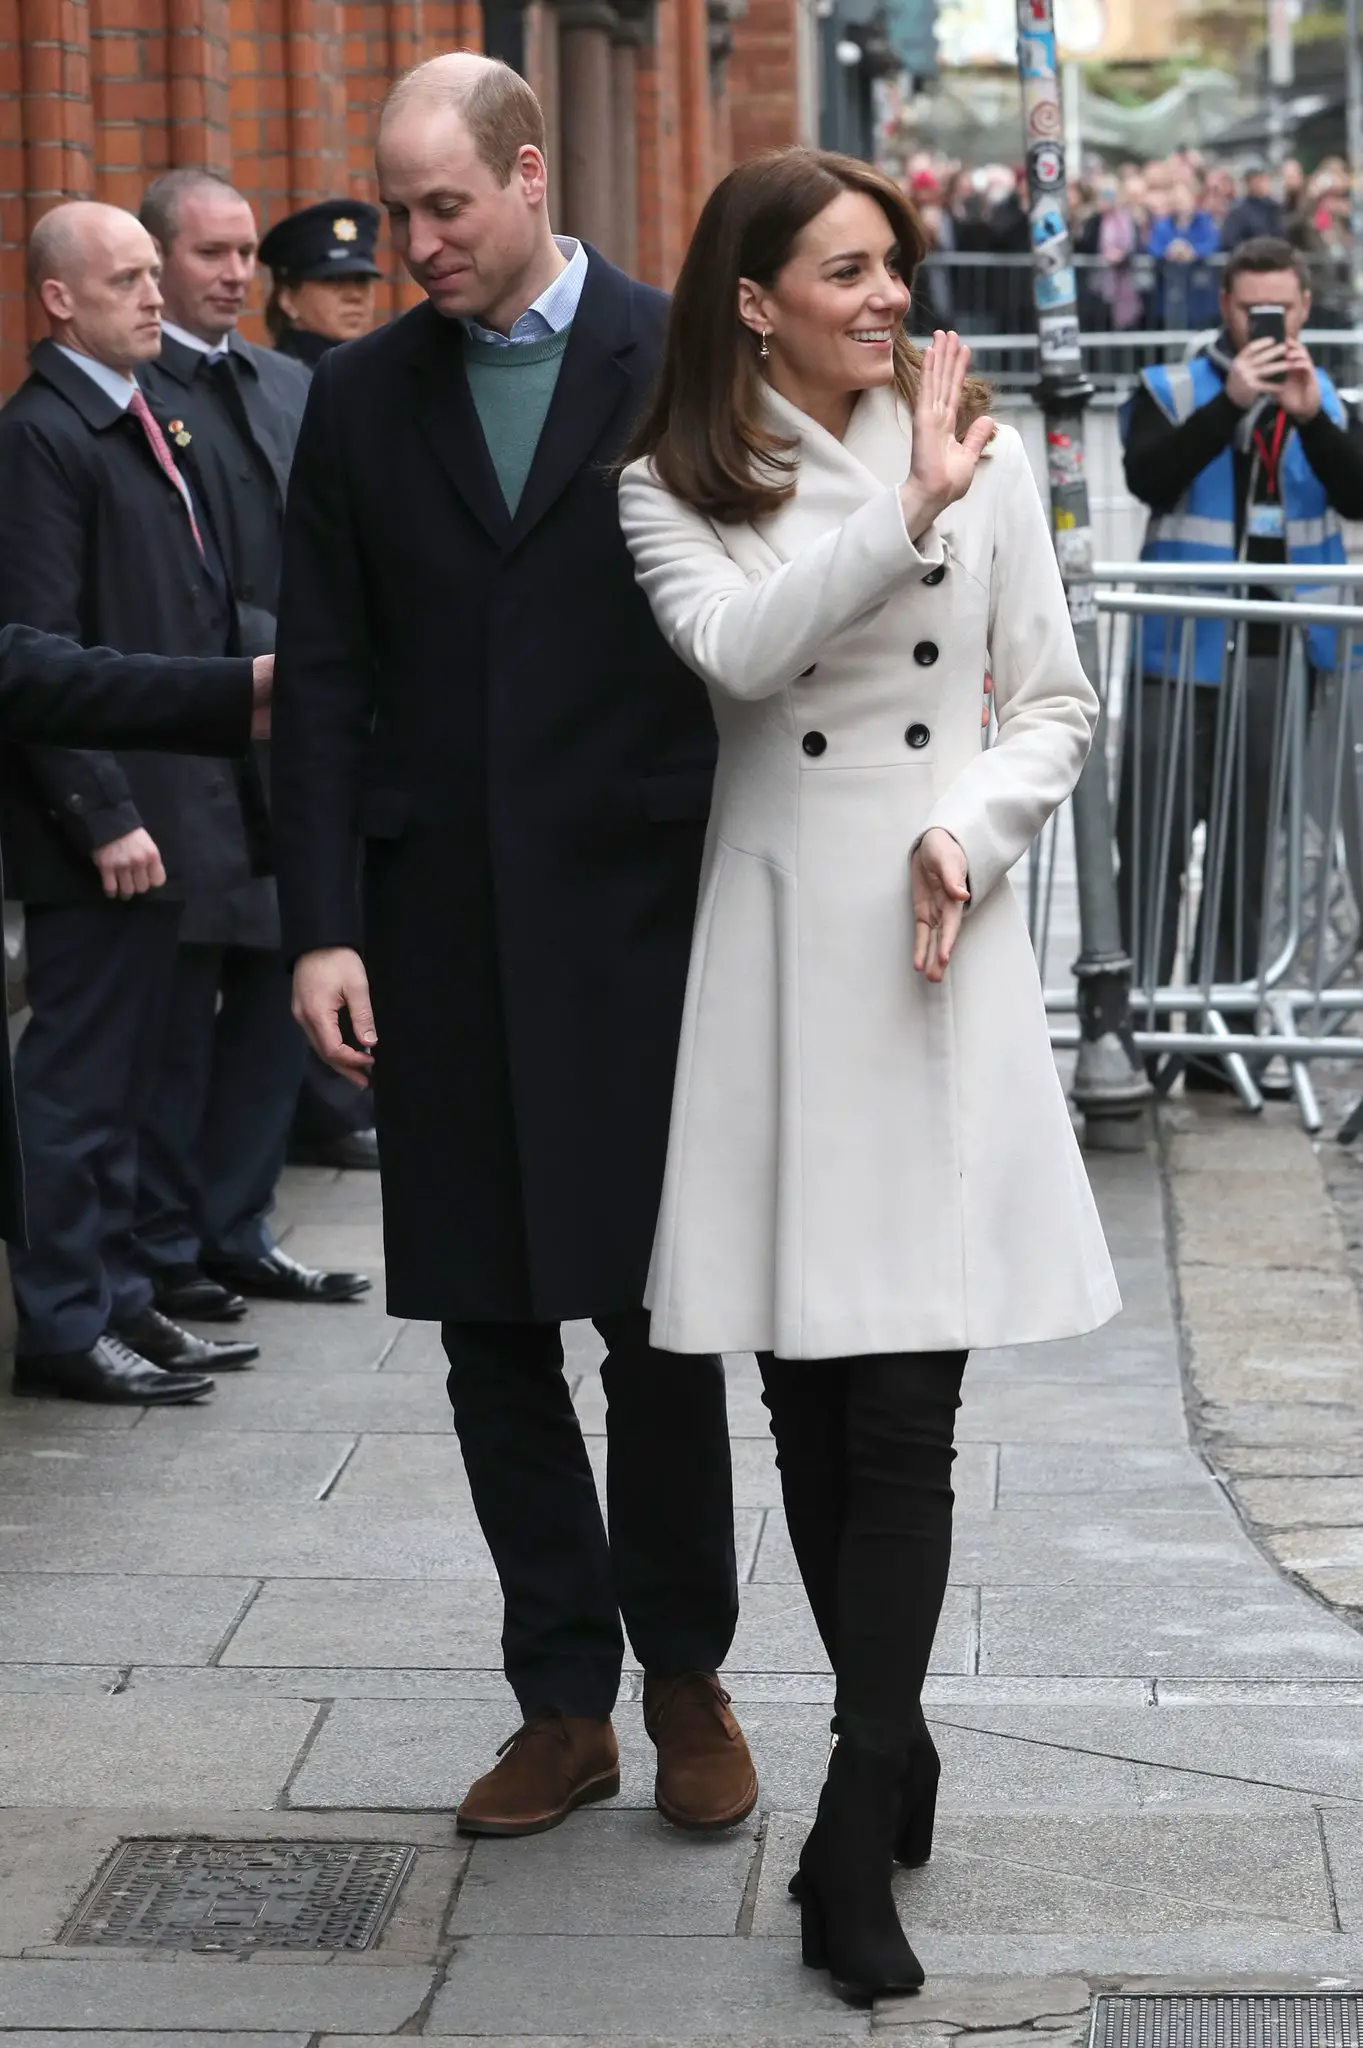 The Duke and Duchess of Cambridge visited Jigsaw and Extern in Dublin on day 2 of Ireland